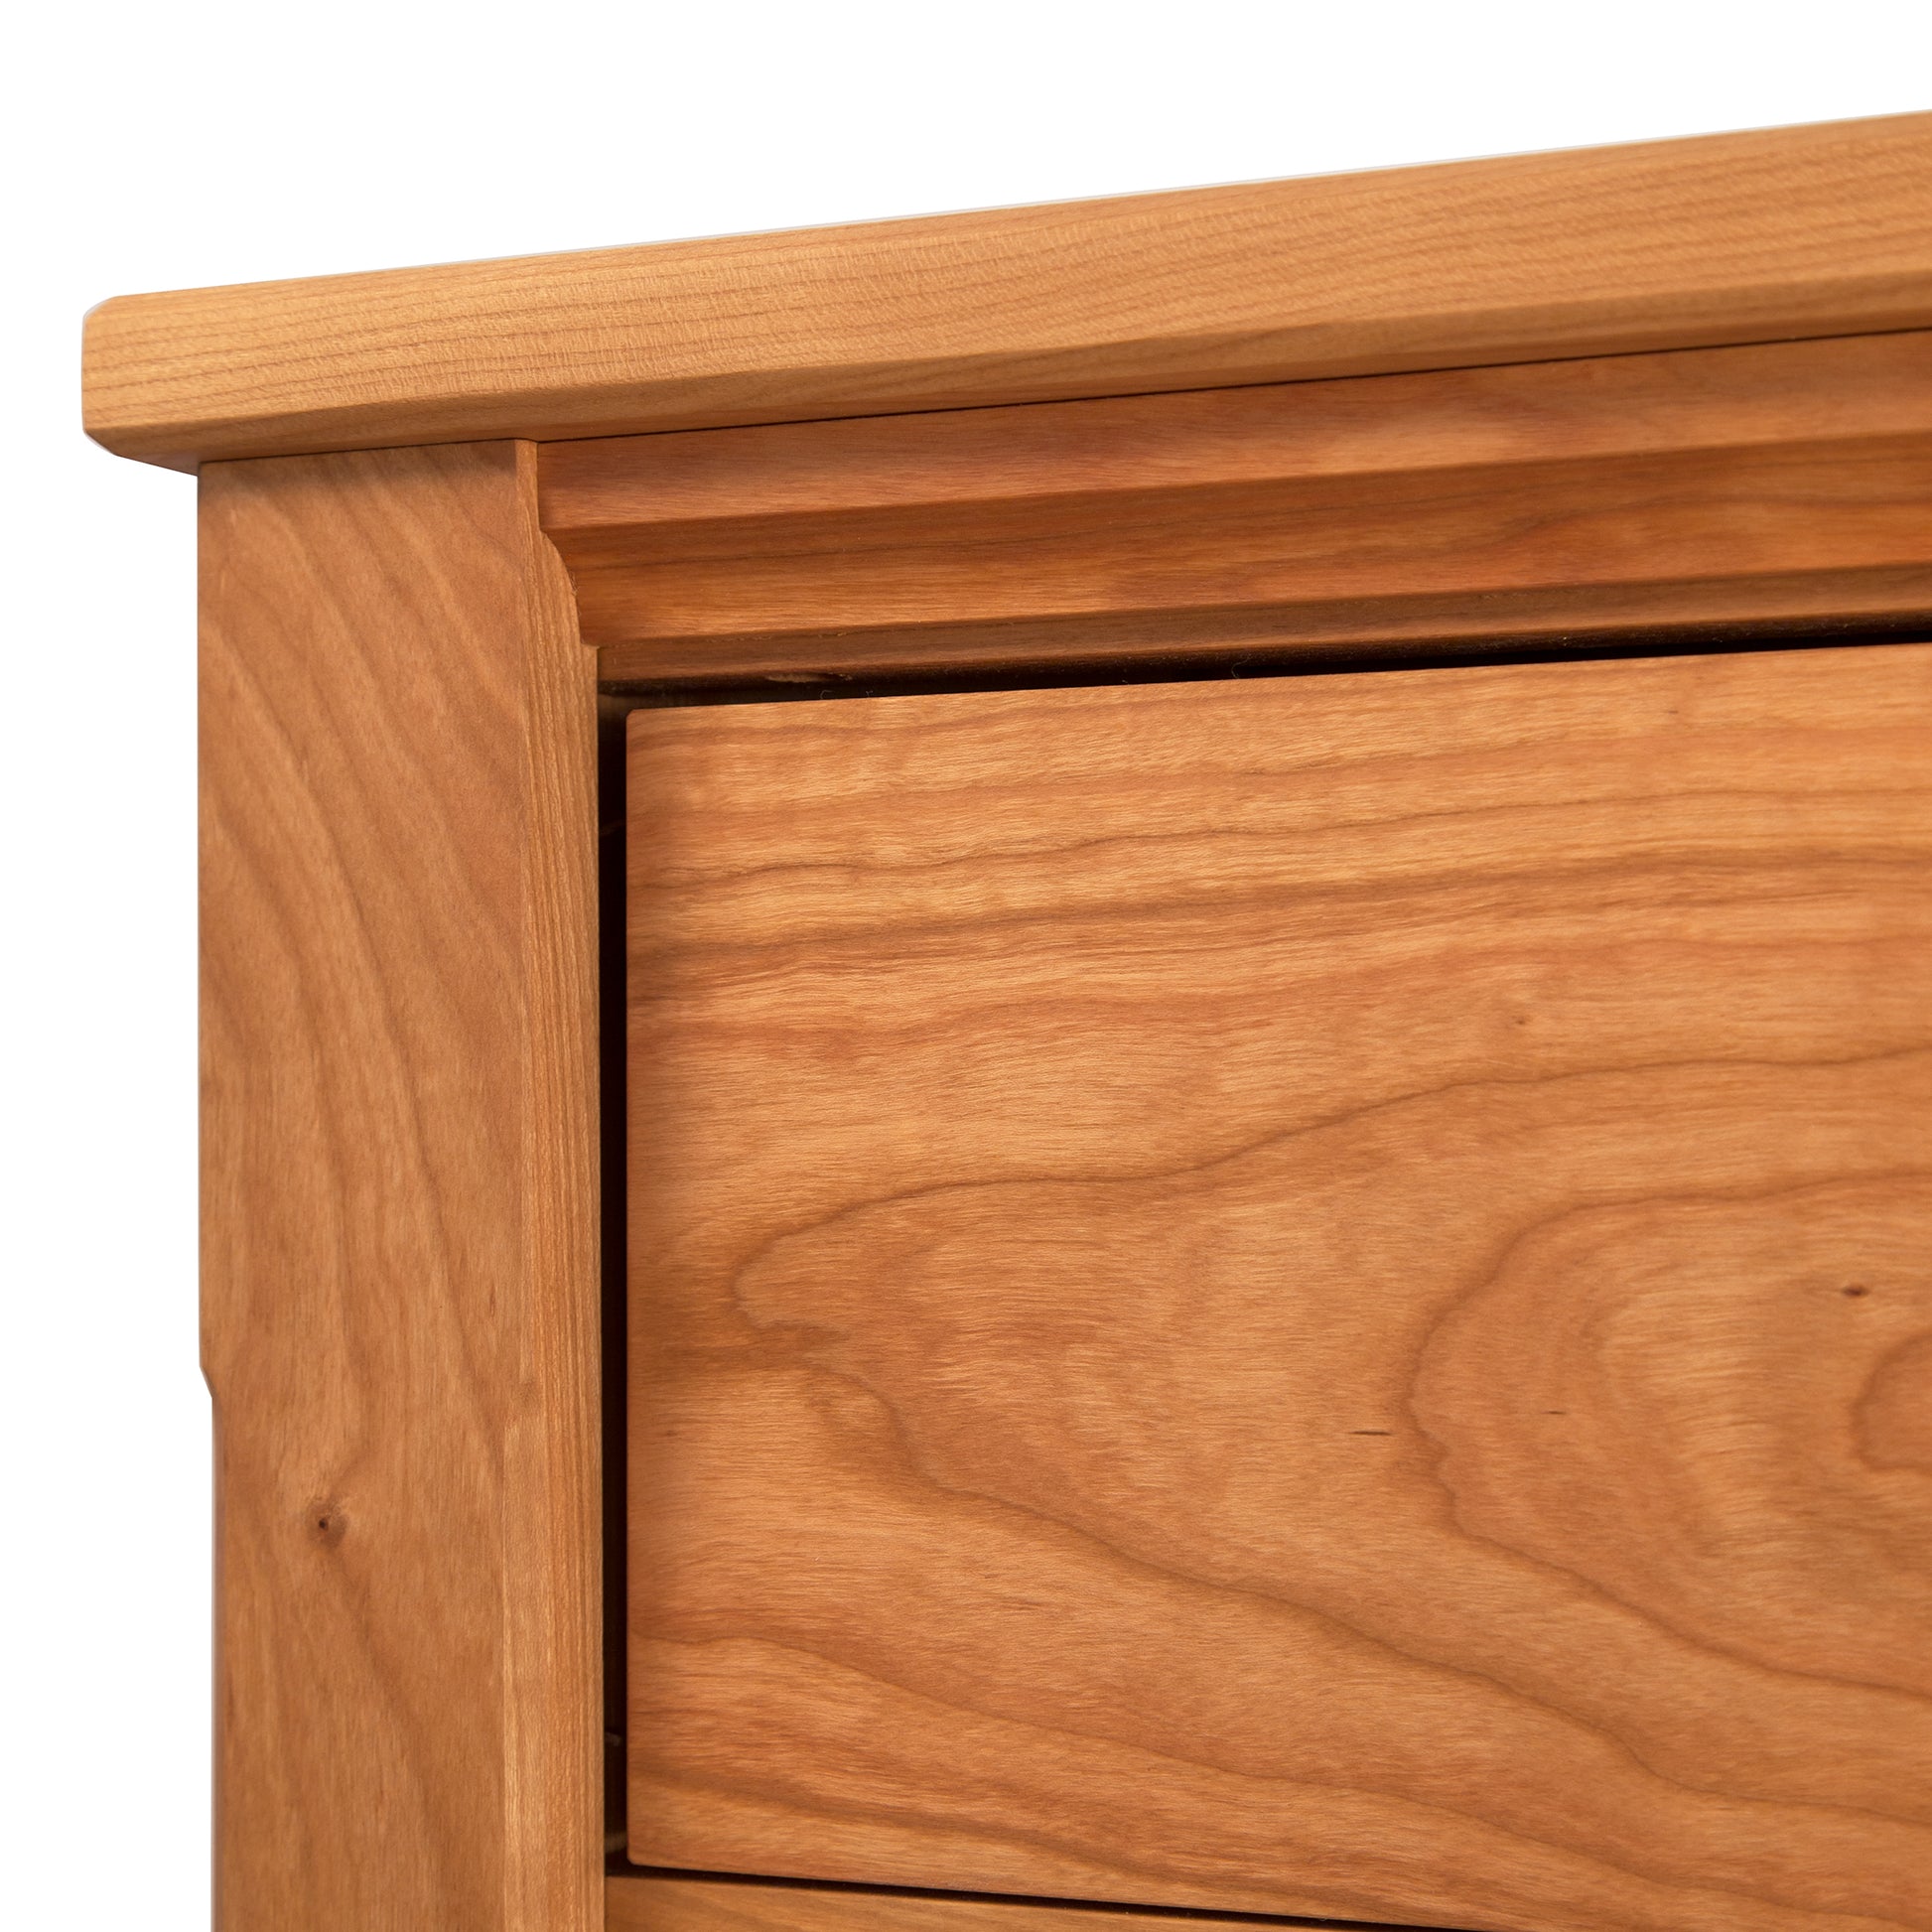 A close up of a Maple Corner Woodworks Vermont Shaker Extra Wide Chest made from natural hardwood.